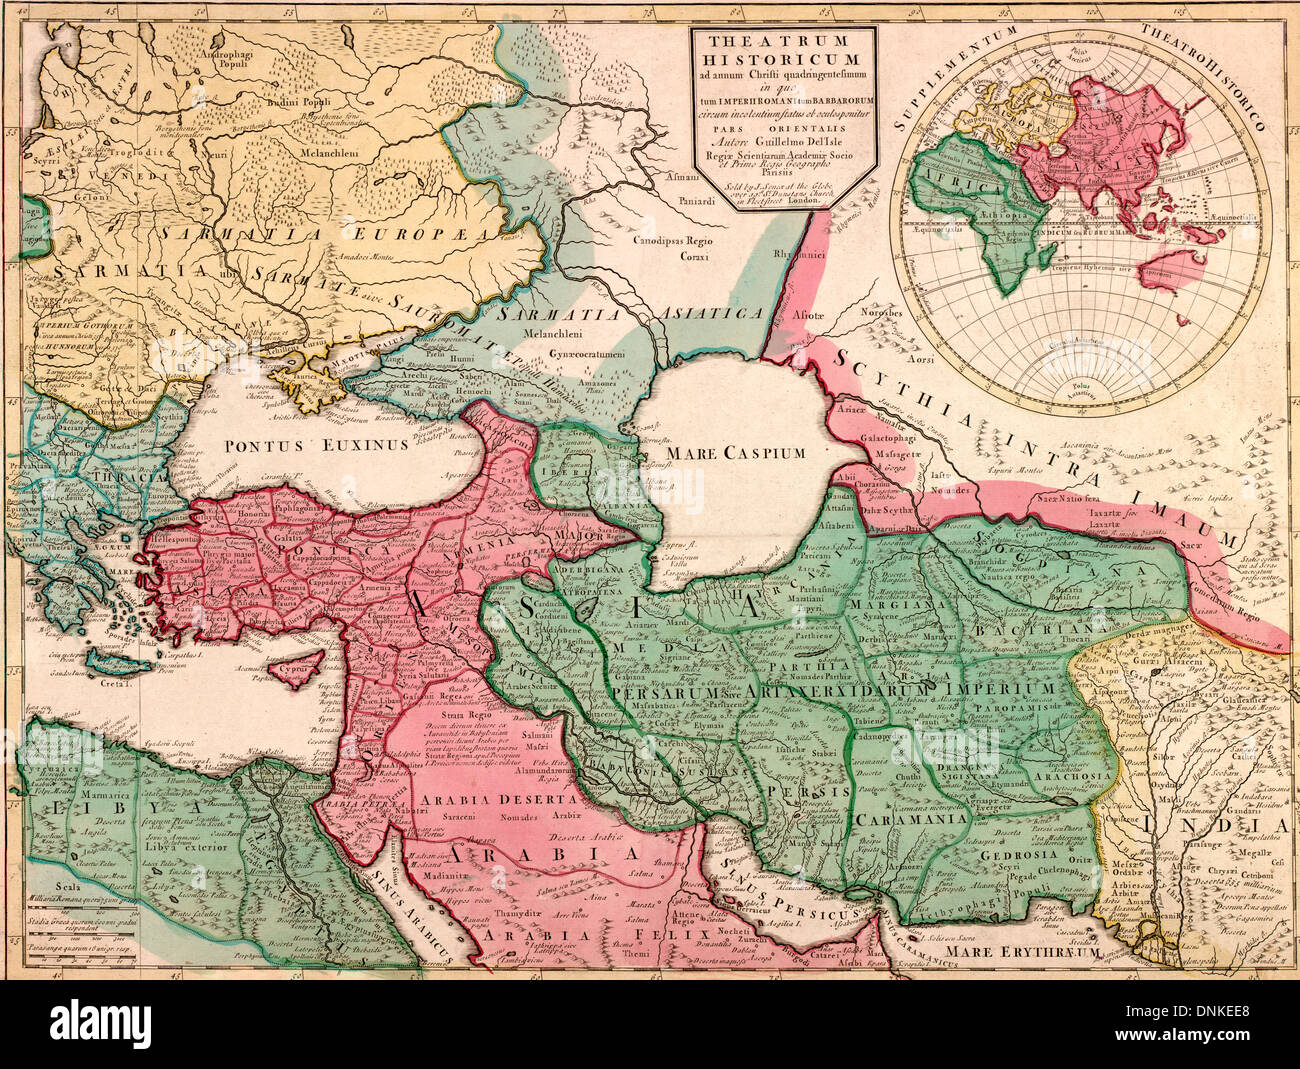 European/Asia Map, circa 1900 Theatre of four hundred years of history in which the Roman Empire and the barbarian inhabitants around the eastern part of the state Stock Photo